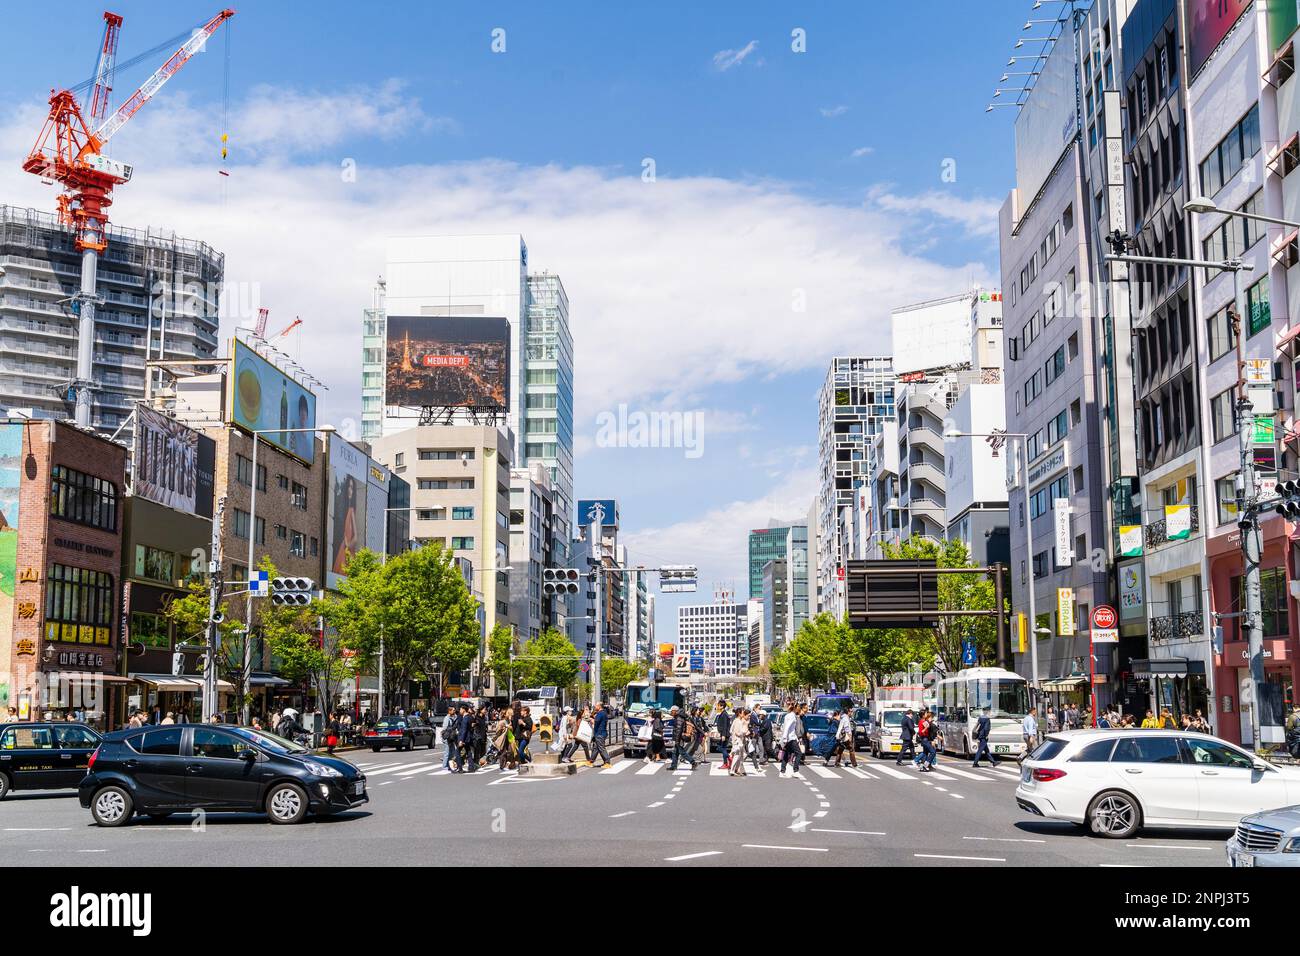 People crossing Aoyama dori street at the busy inter-section with Omotesando in Tokyo on a springtime day with with a blue sky and white clouds. Stock Photo